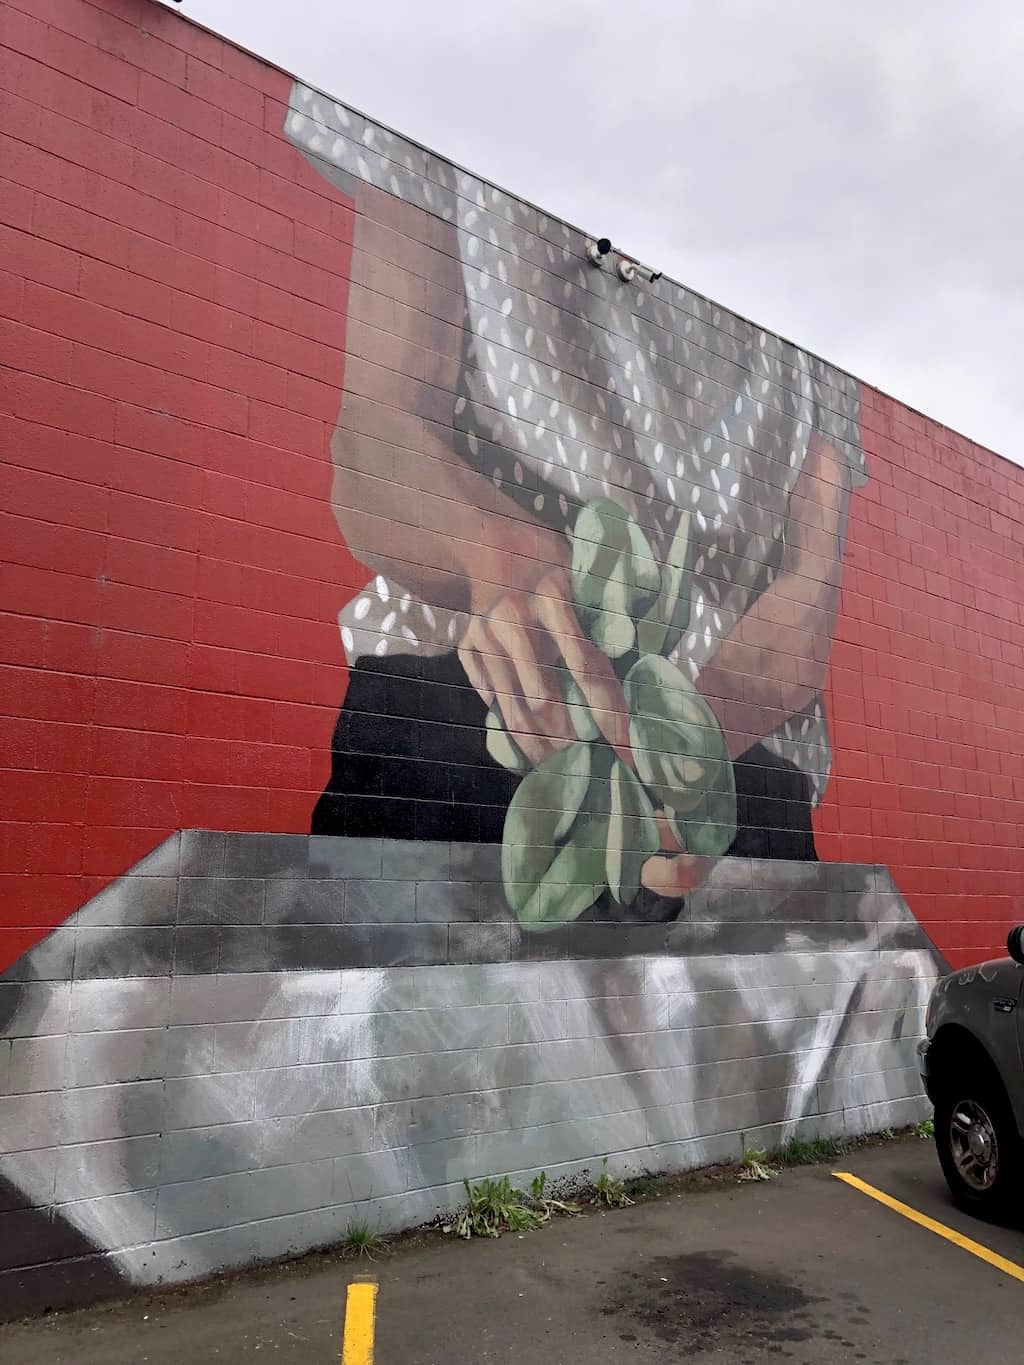 New murals in Eugene Oregon - Track Town USA / To & Fro Fam